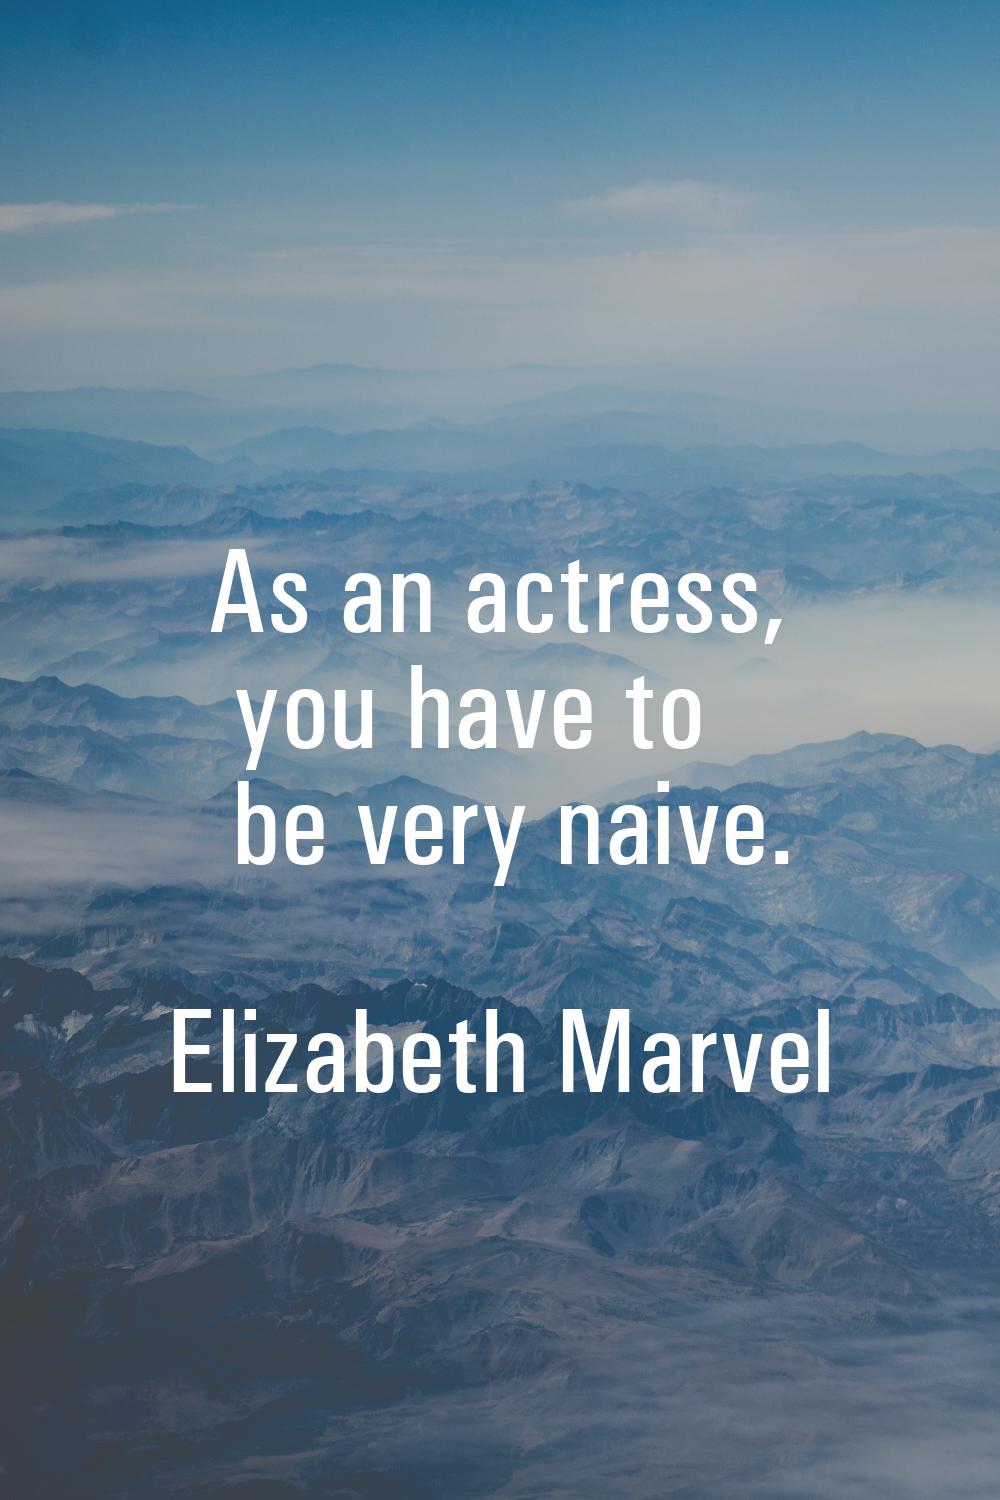 As an actress, you have to be very naive.